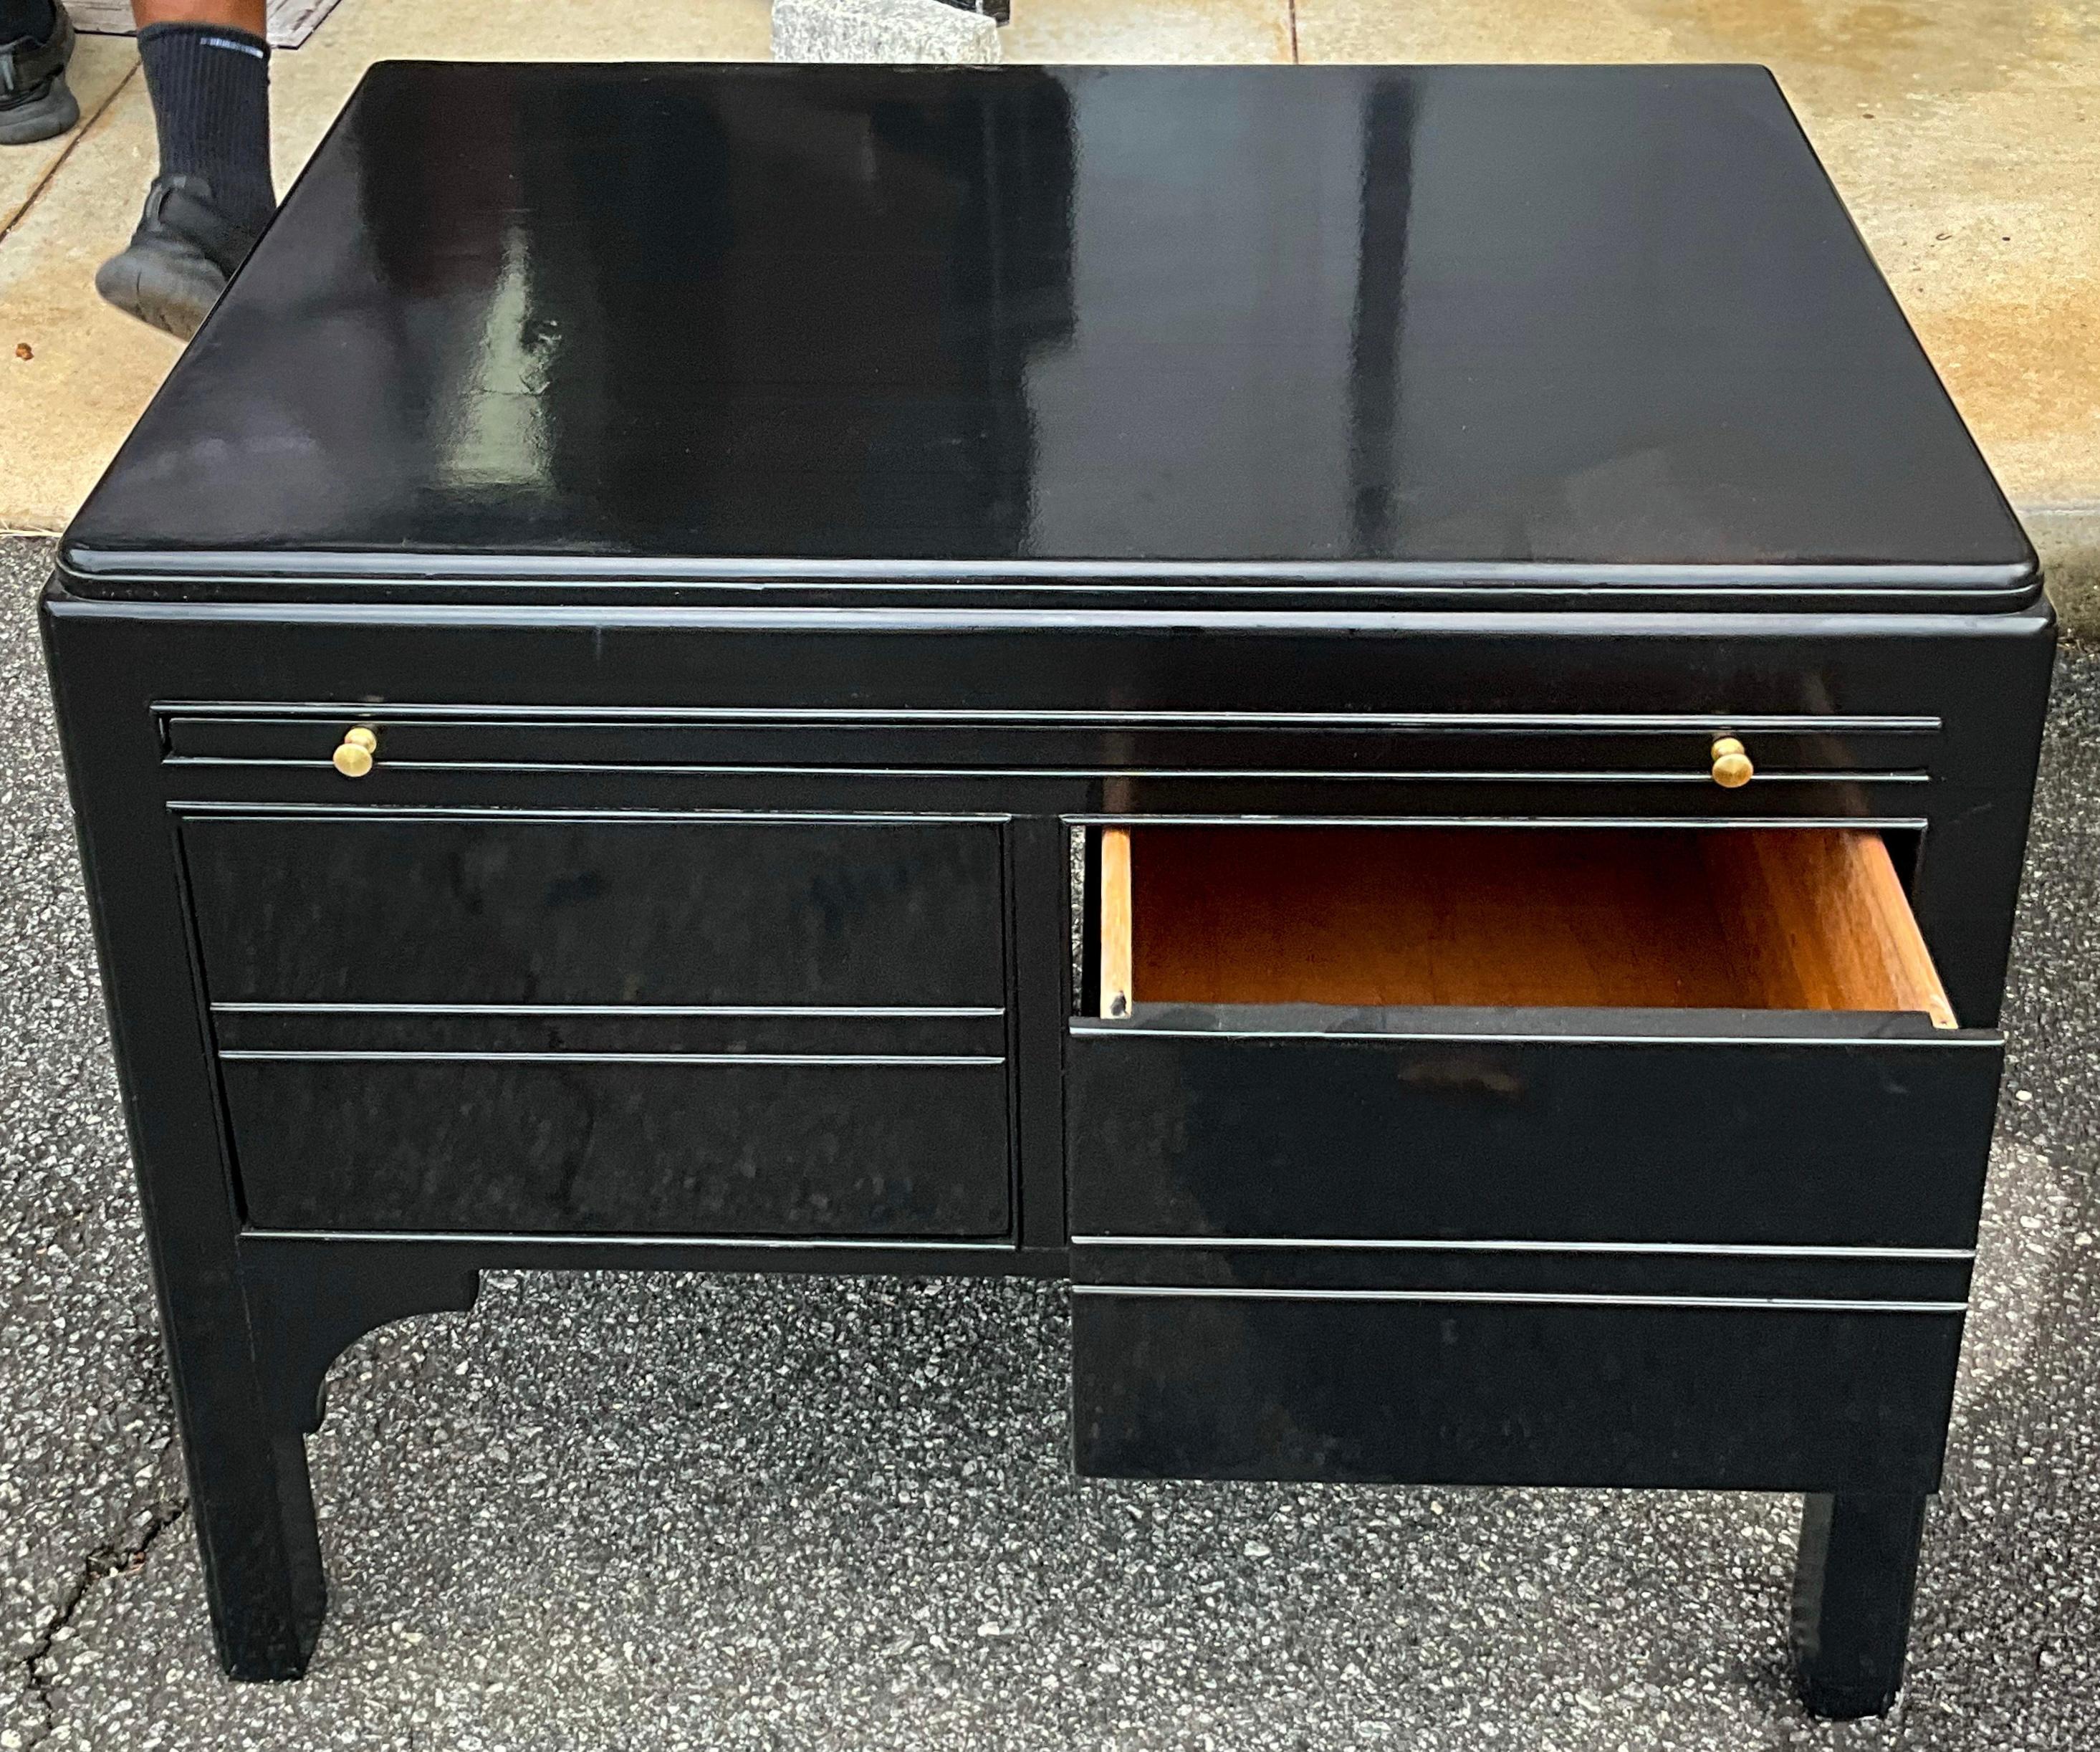 Mid-20th Century Mid-Century Asian Modern Low Profile Black Lacquer Side Tables / Chests -Pair For Sale